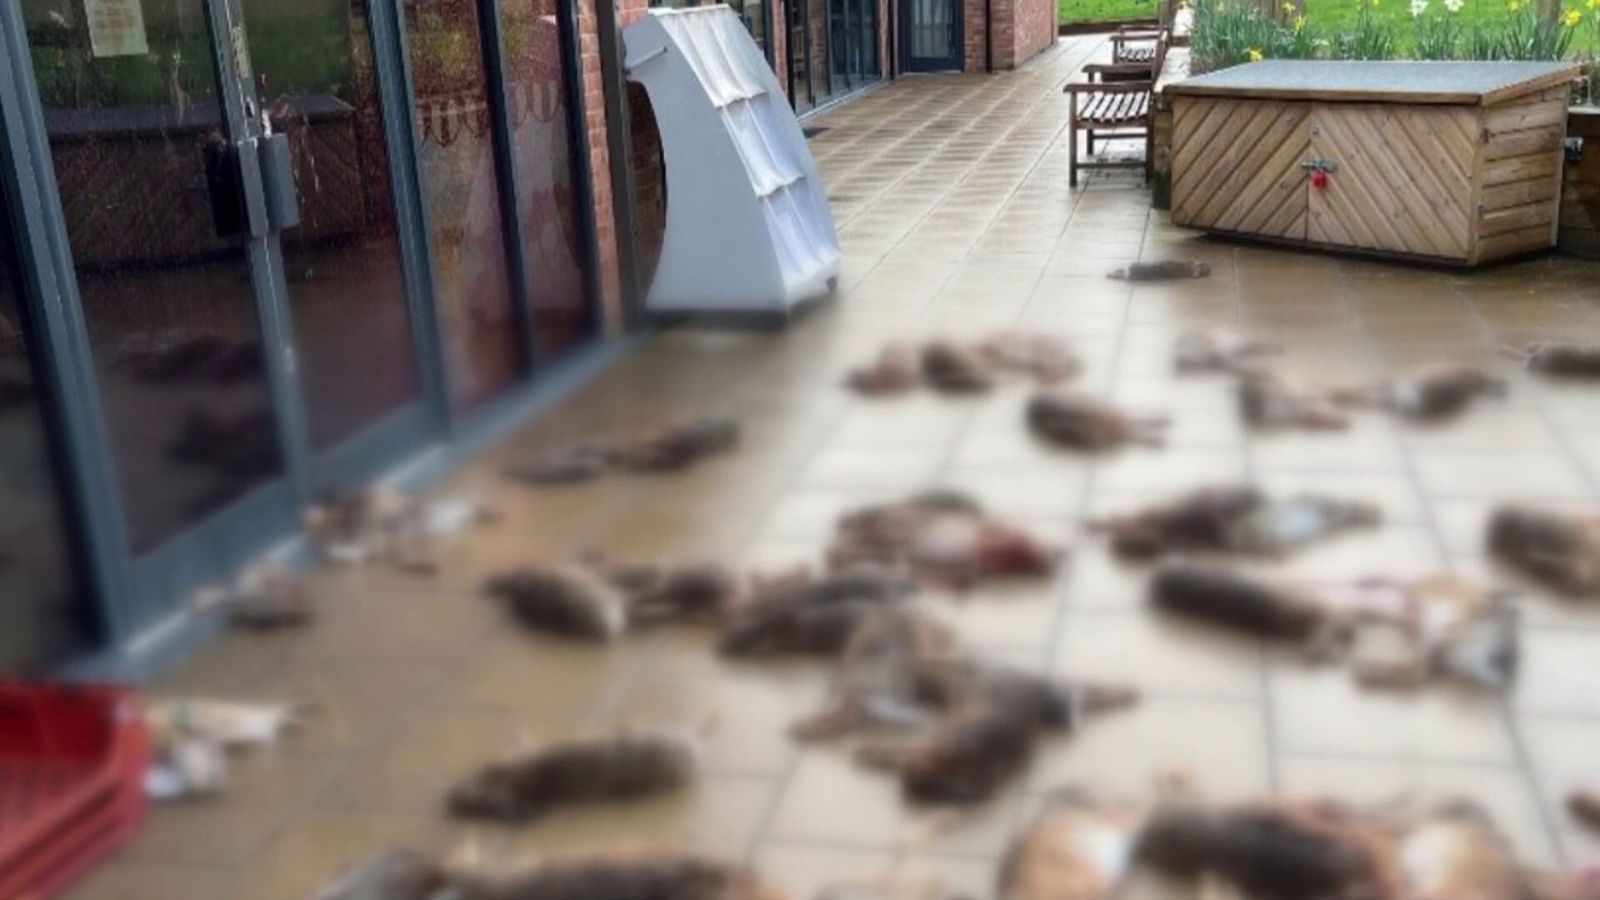 Man arrested after more than 50 dead animals found dumped outside Broughton Community Shop